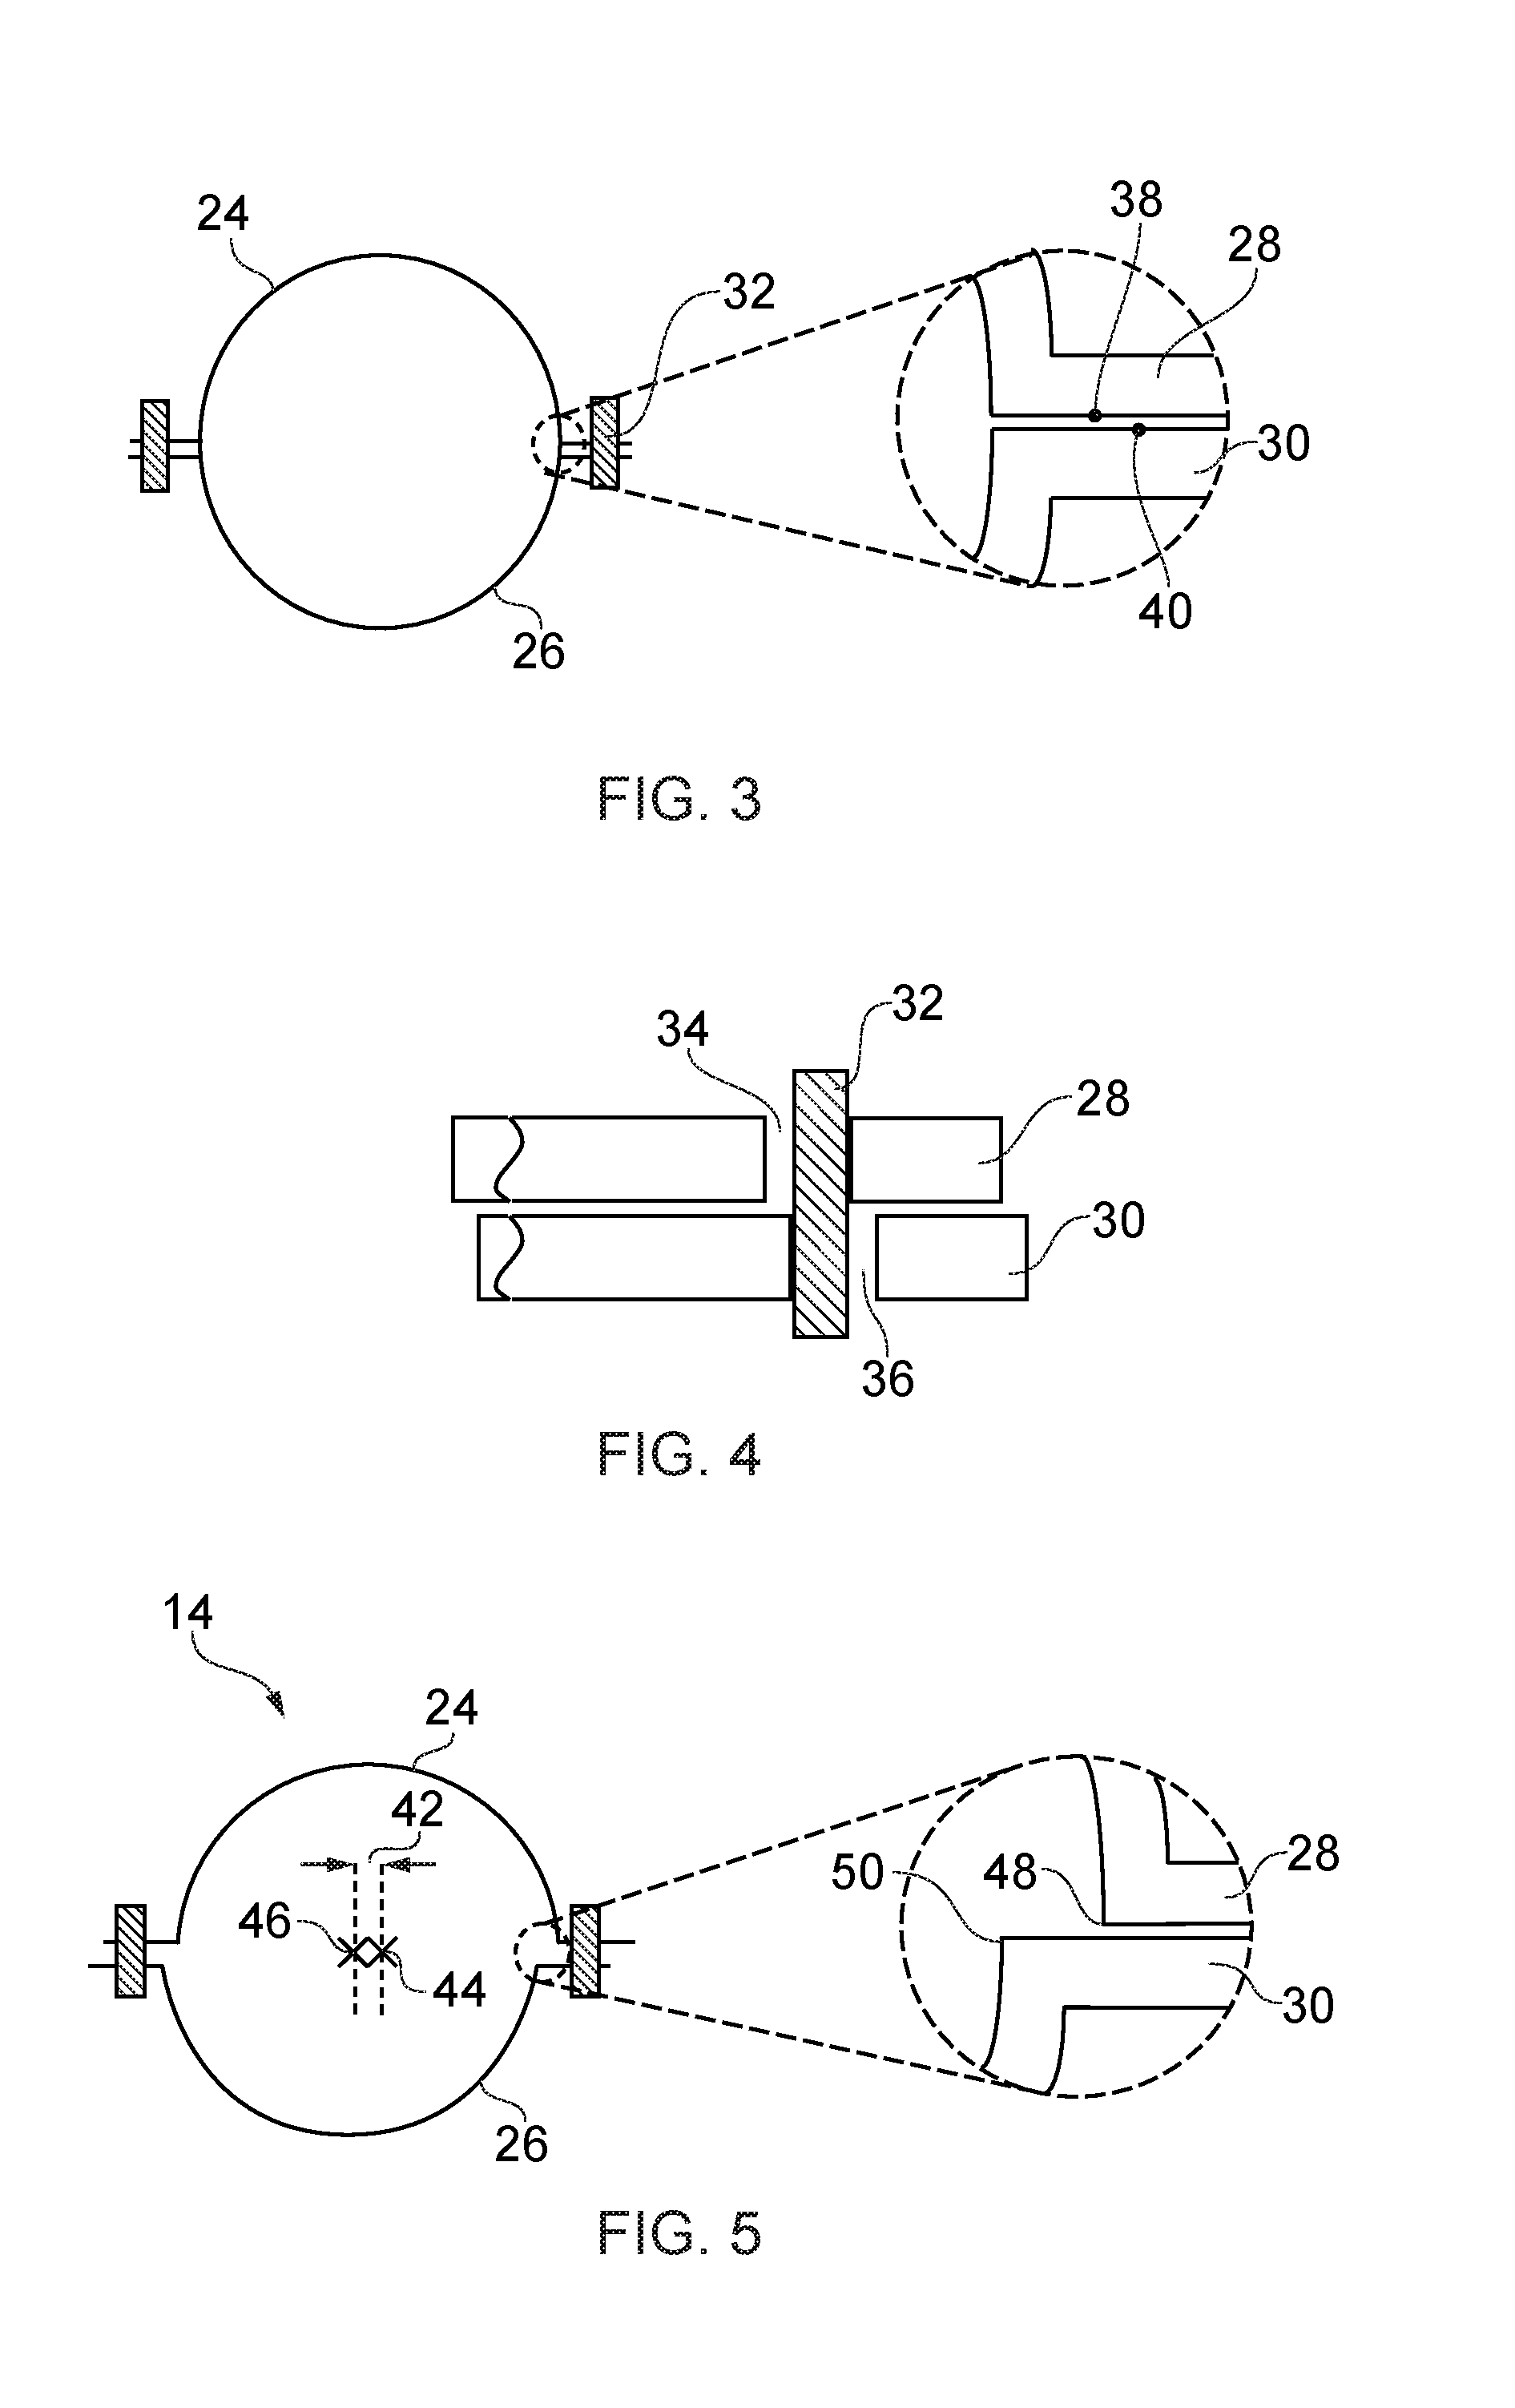 Alignment of flanged components